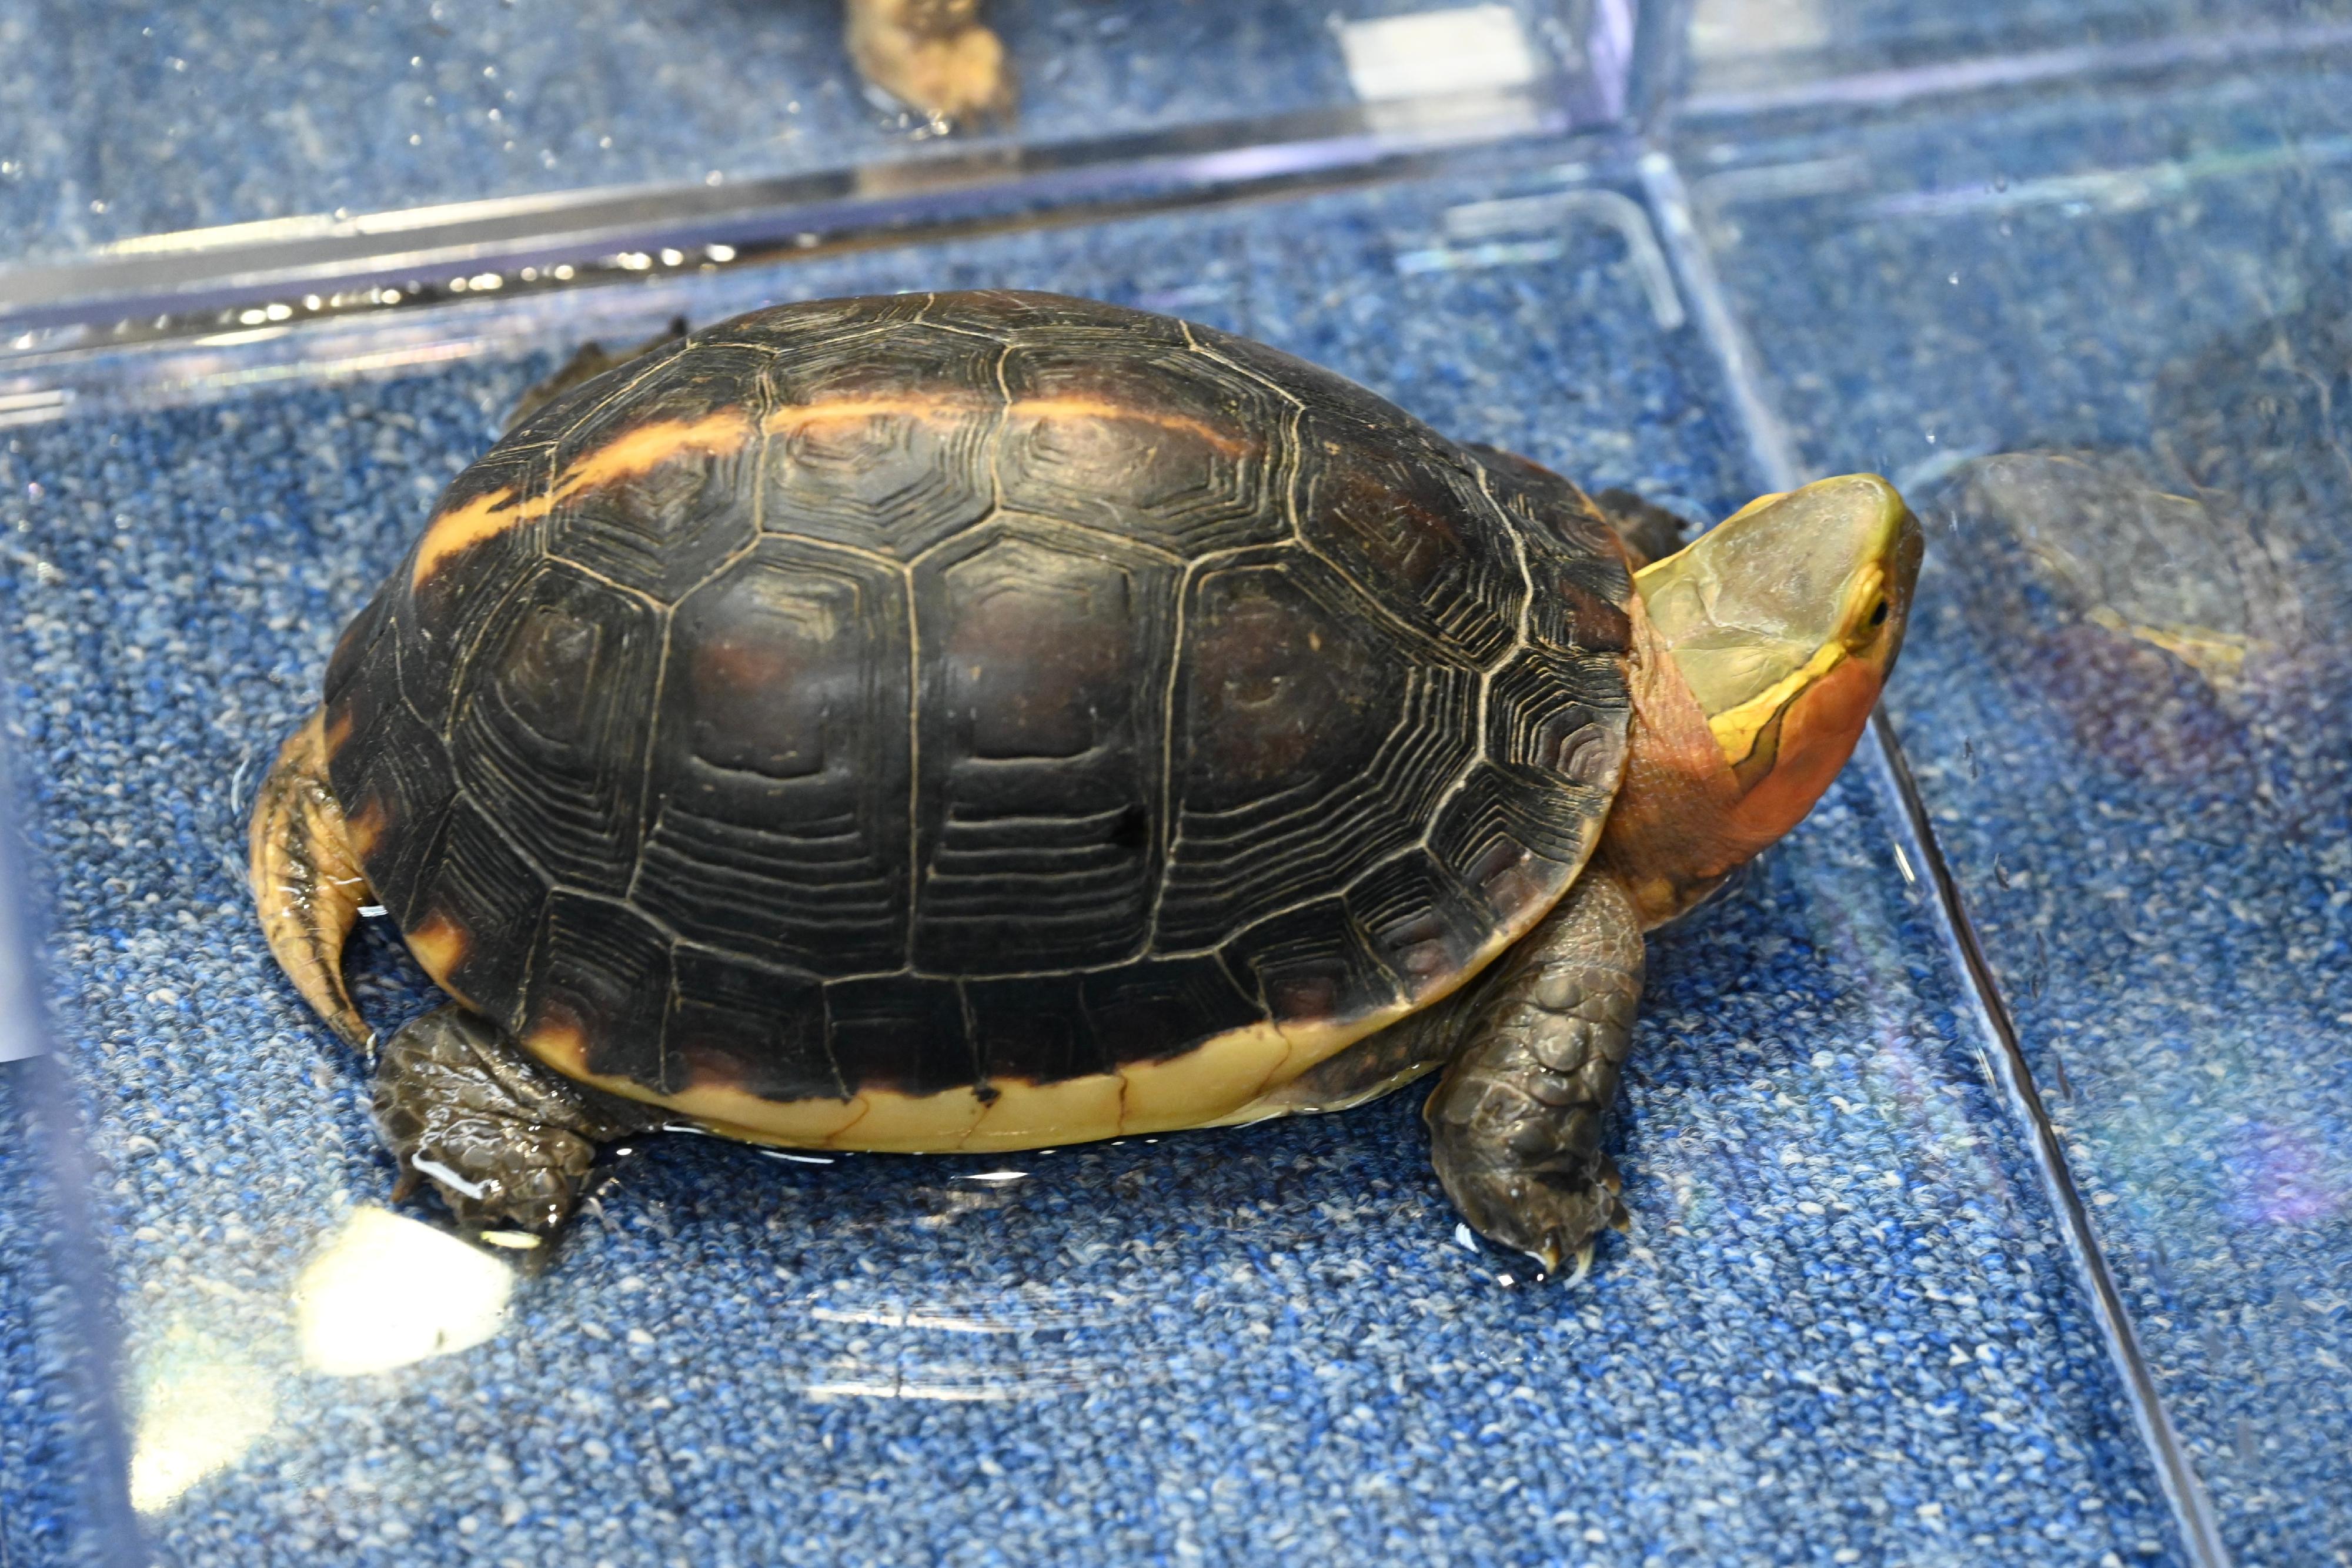 The Agriculture, Fisheries and Conservation Department conducted a joint operation with the Hong Kong Police Force on May 17 on a case of suspected illegal possession of endangered species. Thirty-one specimens of turtles suspected of being illegally possessed were seized on a premises. Photo shows a yellow-margined box turtle (Cuora flavomarginata), which is listed on Appendix II to the Convention on International Trade in Endangered Species of Wild Fauna and Flora, seized by the officers.